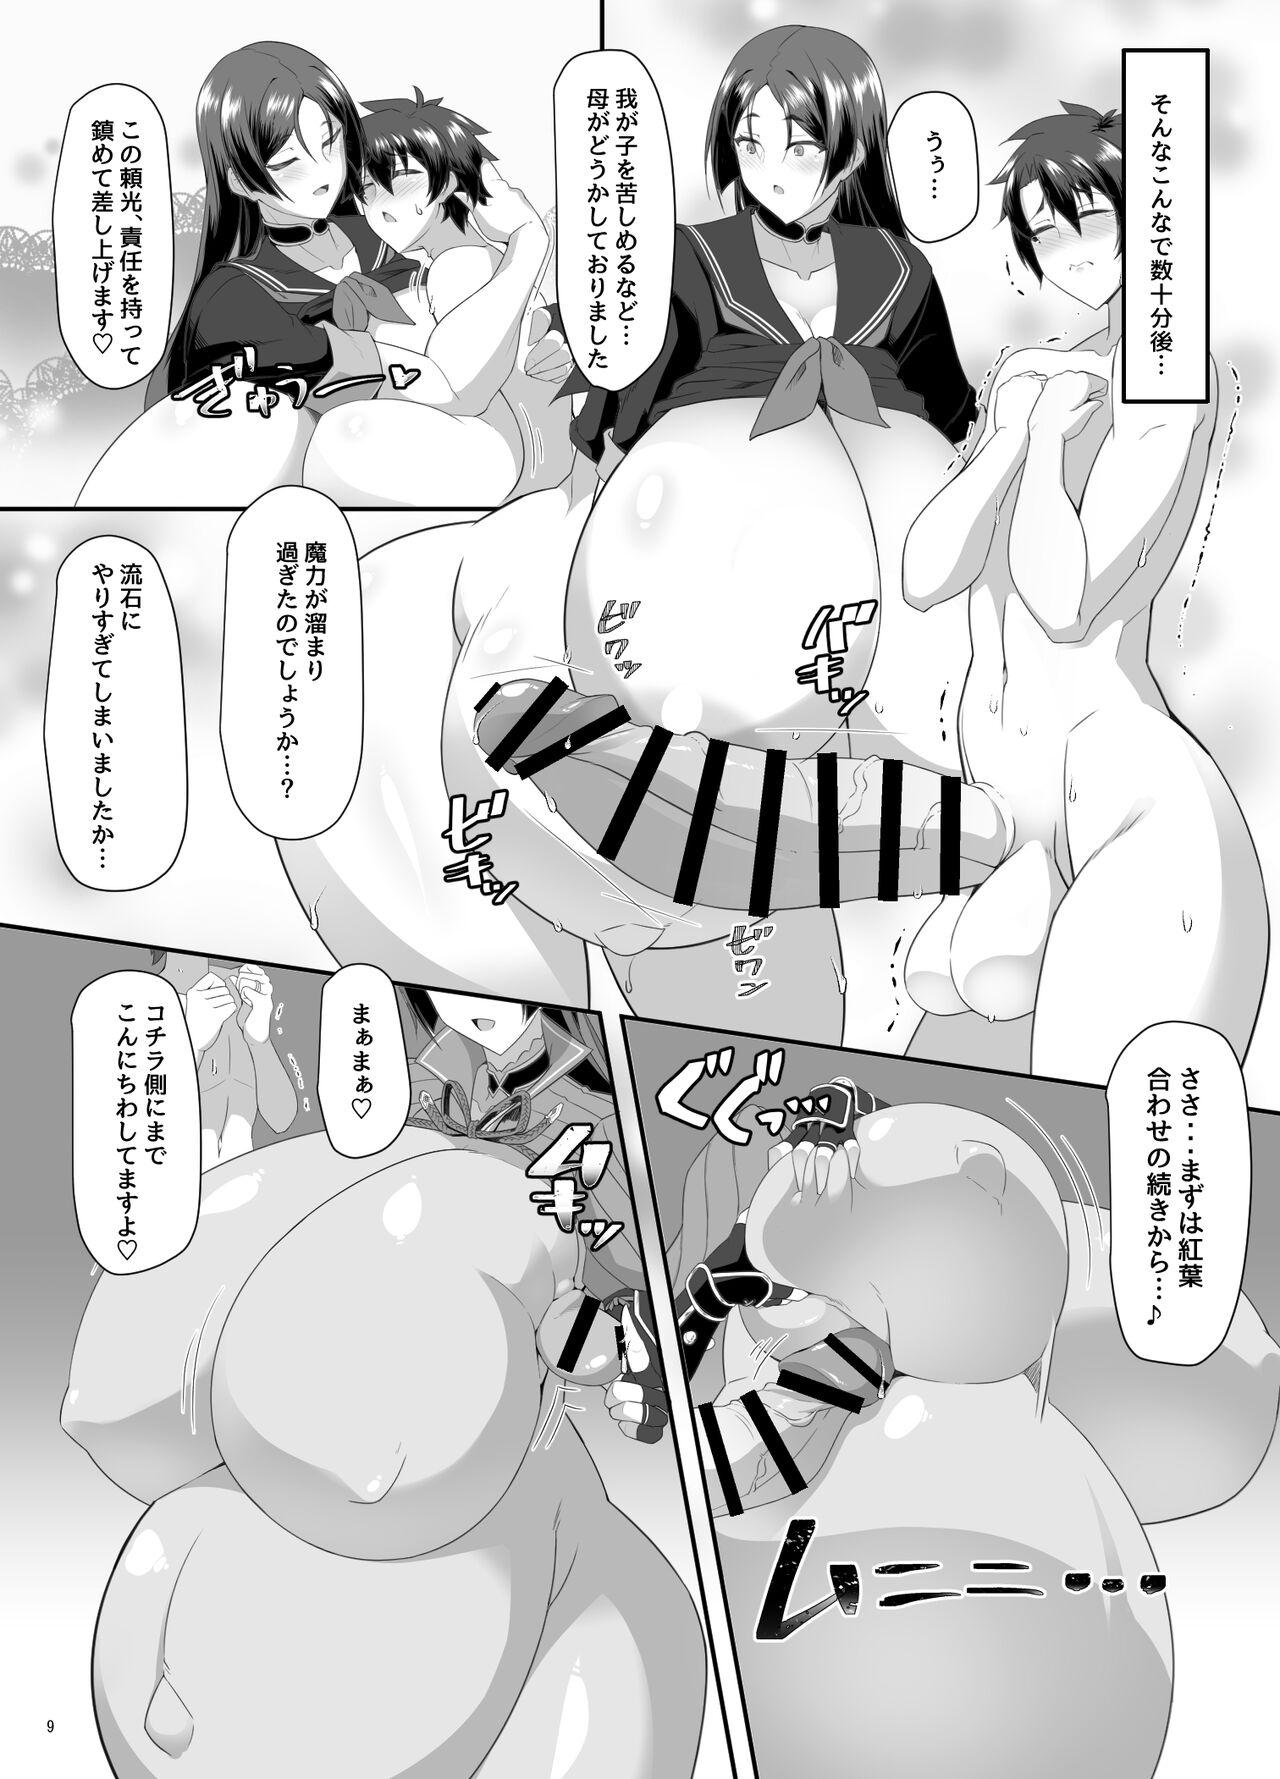 Teenies 丑母と瞳合う - Fate grand order Stepfather - Page 8